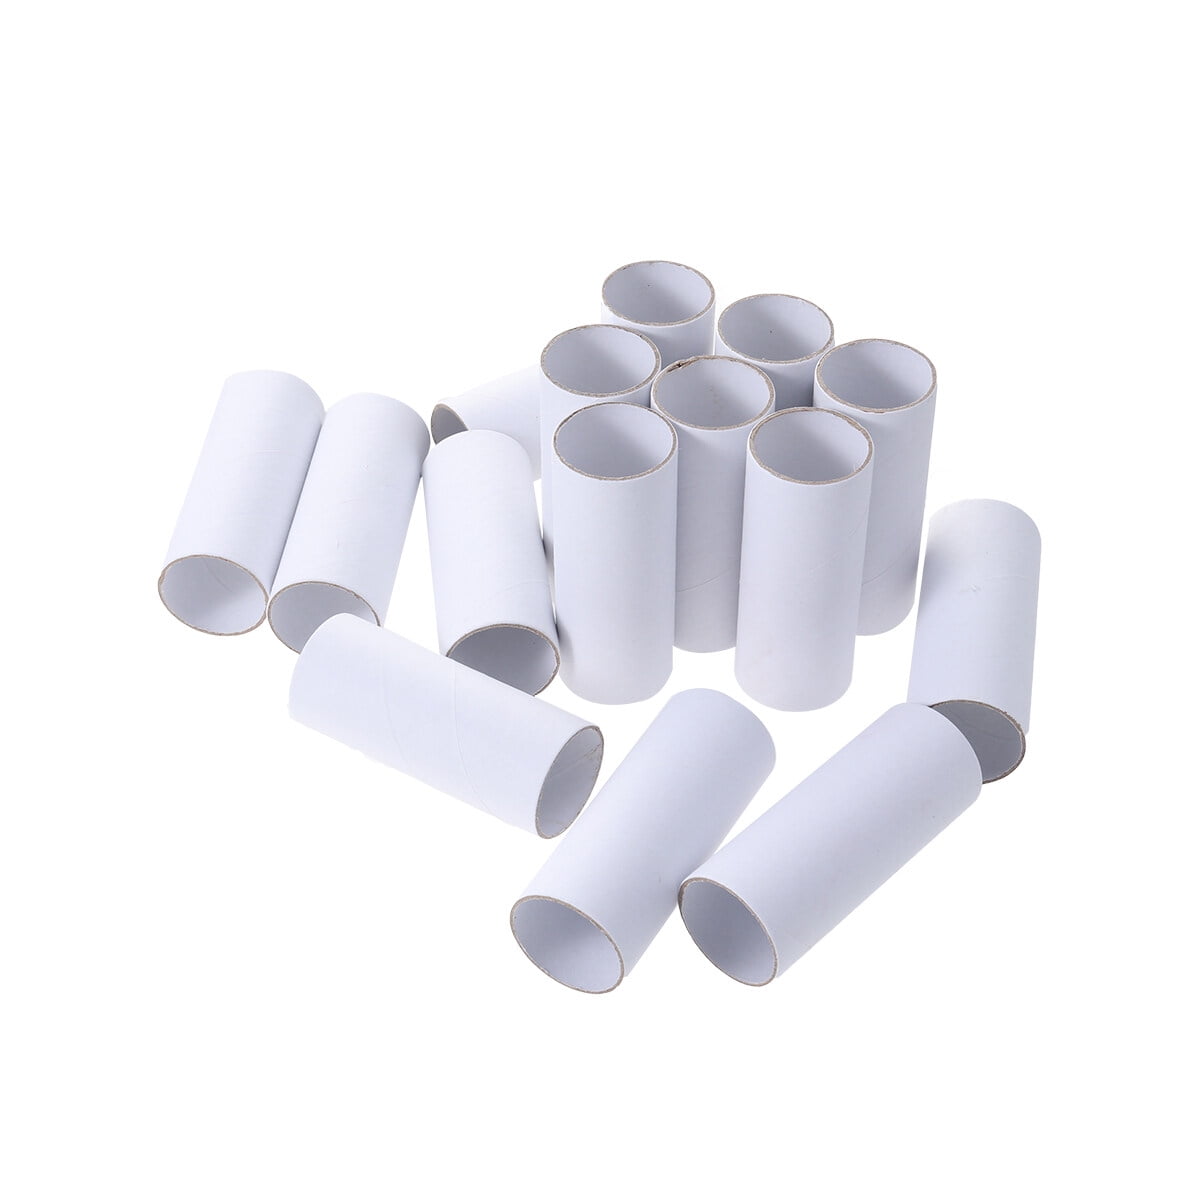 100 Packs Cardboard Tubes for Craft, 1.57 x 3.35 Inch, Toilet Paper Empty  Rolls Round Thick Tubes for School Teacher Supplies Classrooms Kid DIY Art